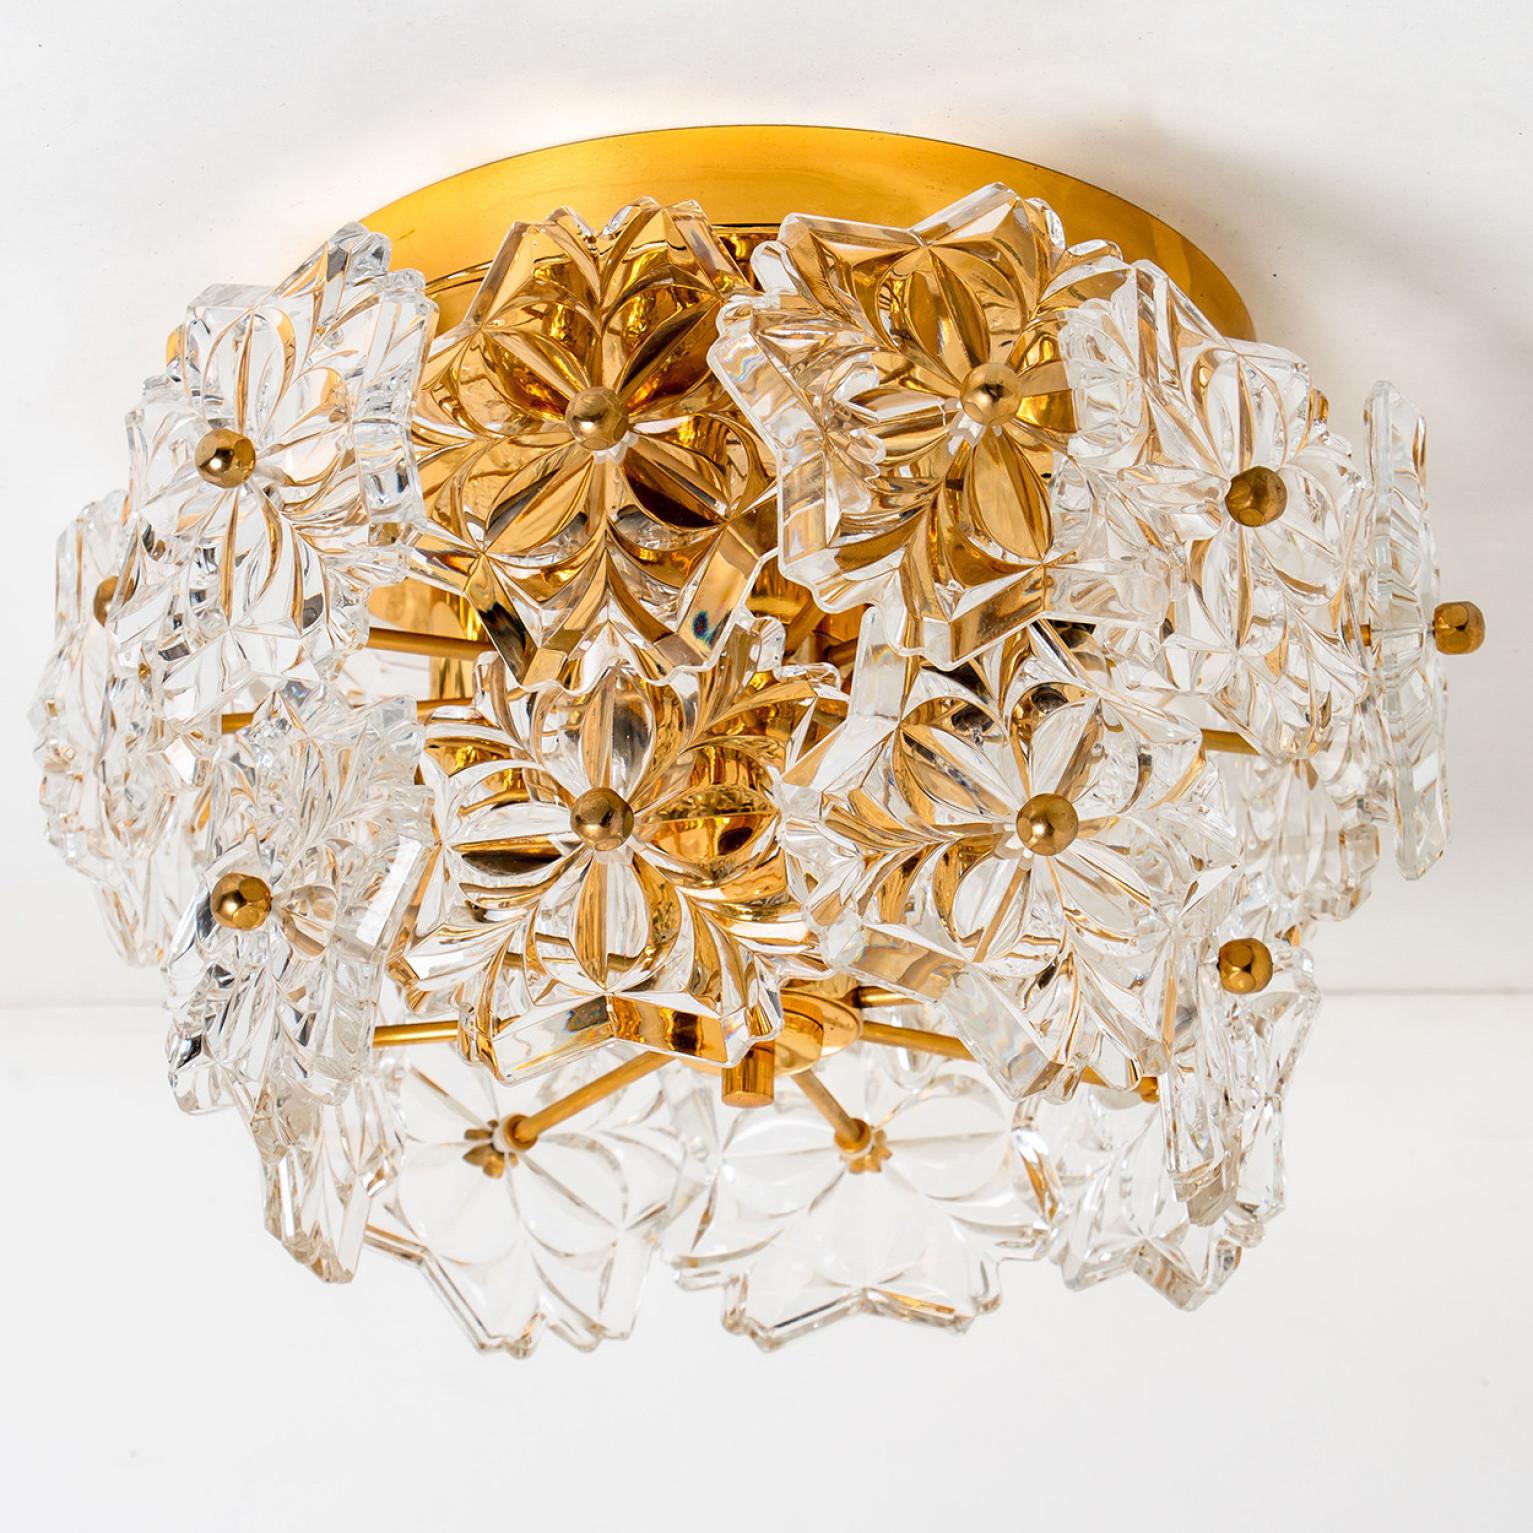 This sculptural flush mount has the design of a bouquet of textured glass flowers and are from the historical lighting company From Germany, manufactured Mid-century, circa 1970 (late 1960s or early 1970s).

The fixture has several flower shaped